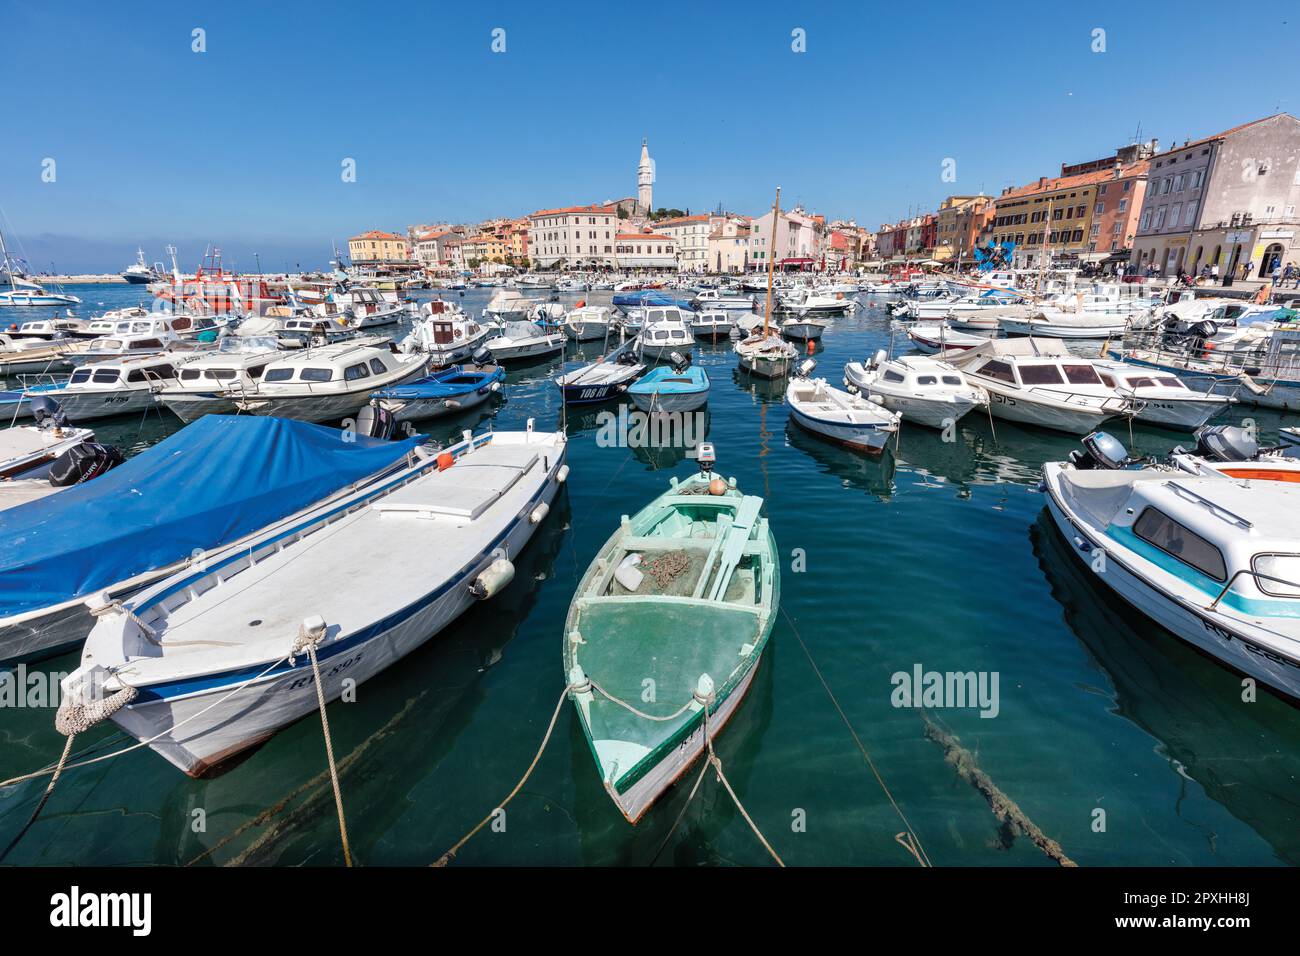 Boats moored in medieval Old Town harbour and marina in Adriatic Sea fishing port with historic  houses, shops, cafes, bars. Stock Photo